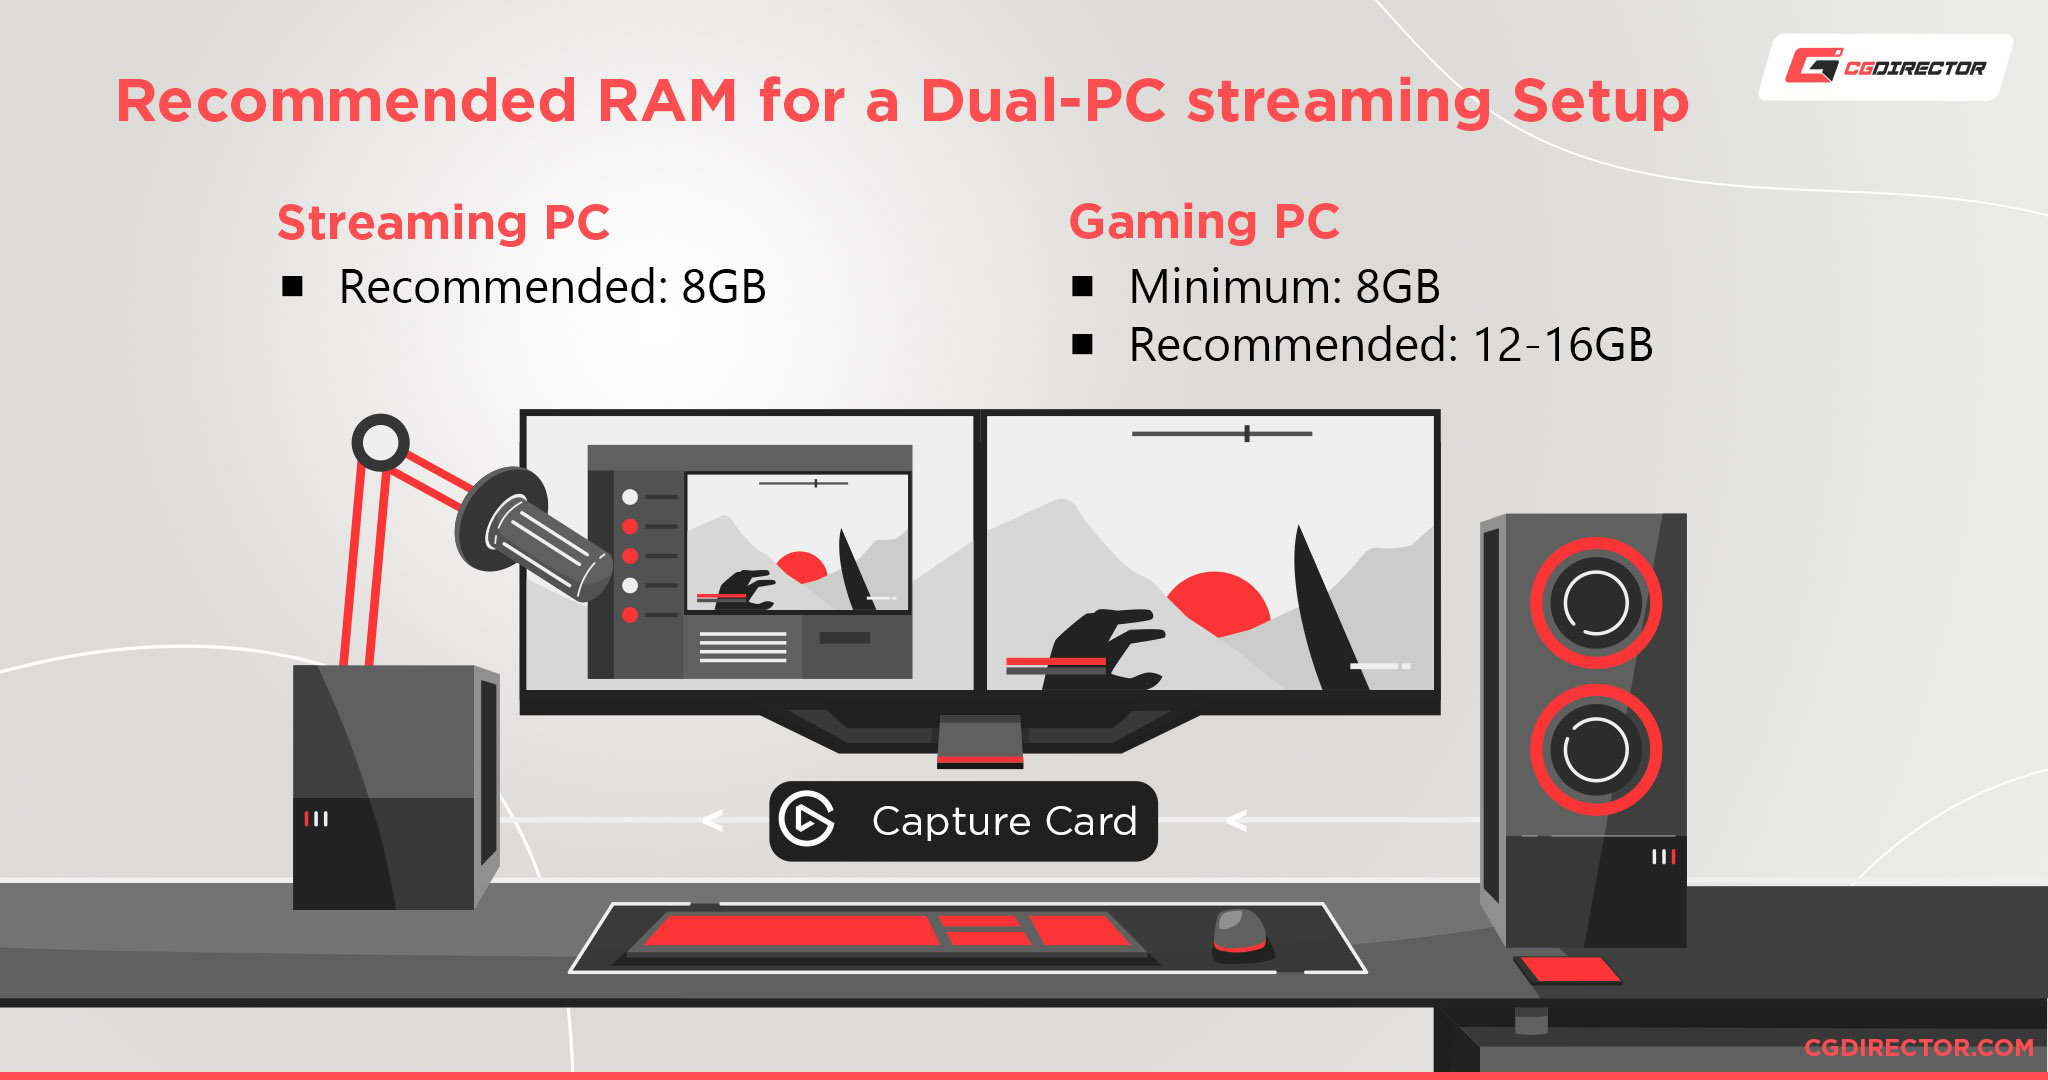 Is 16GB RAM enough memory for PC gaming in 2023 - how much do you need?